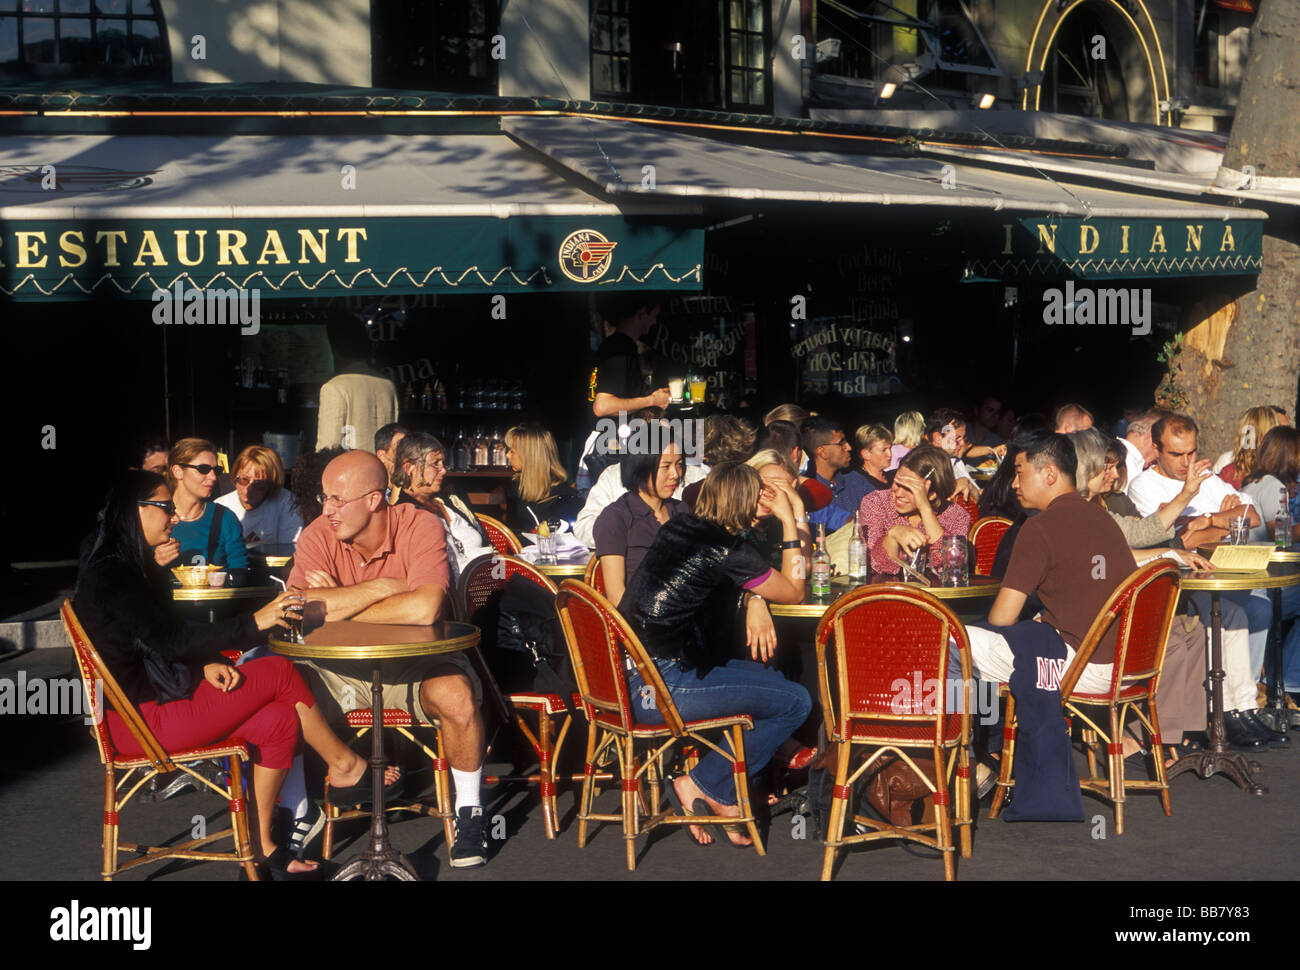 French people, tourists, eating, Indiana Bastille restaurant, French food and drink, French food, Place-de-la-Bastille, Paris, Ile-de-France, France Stock Photo